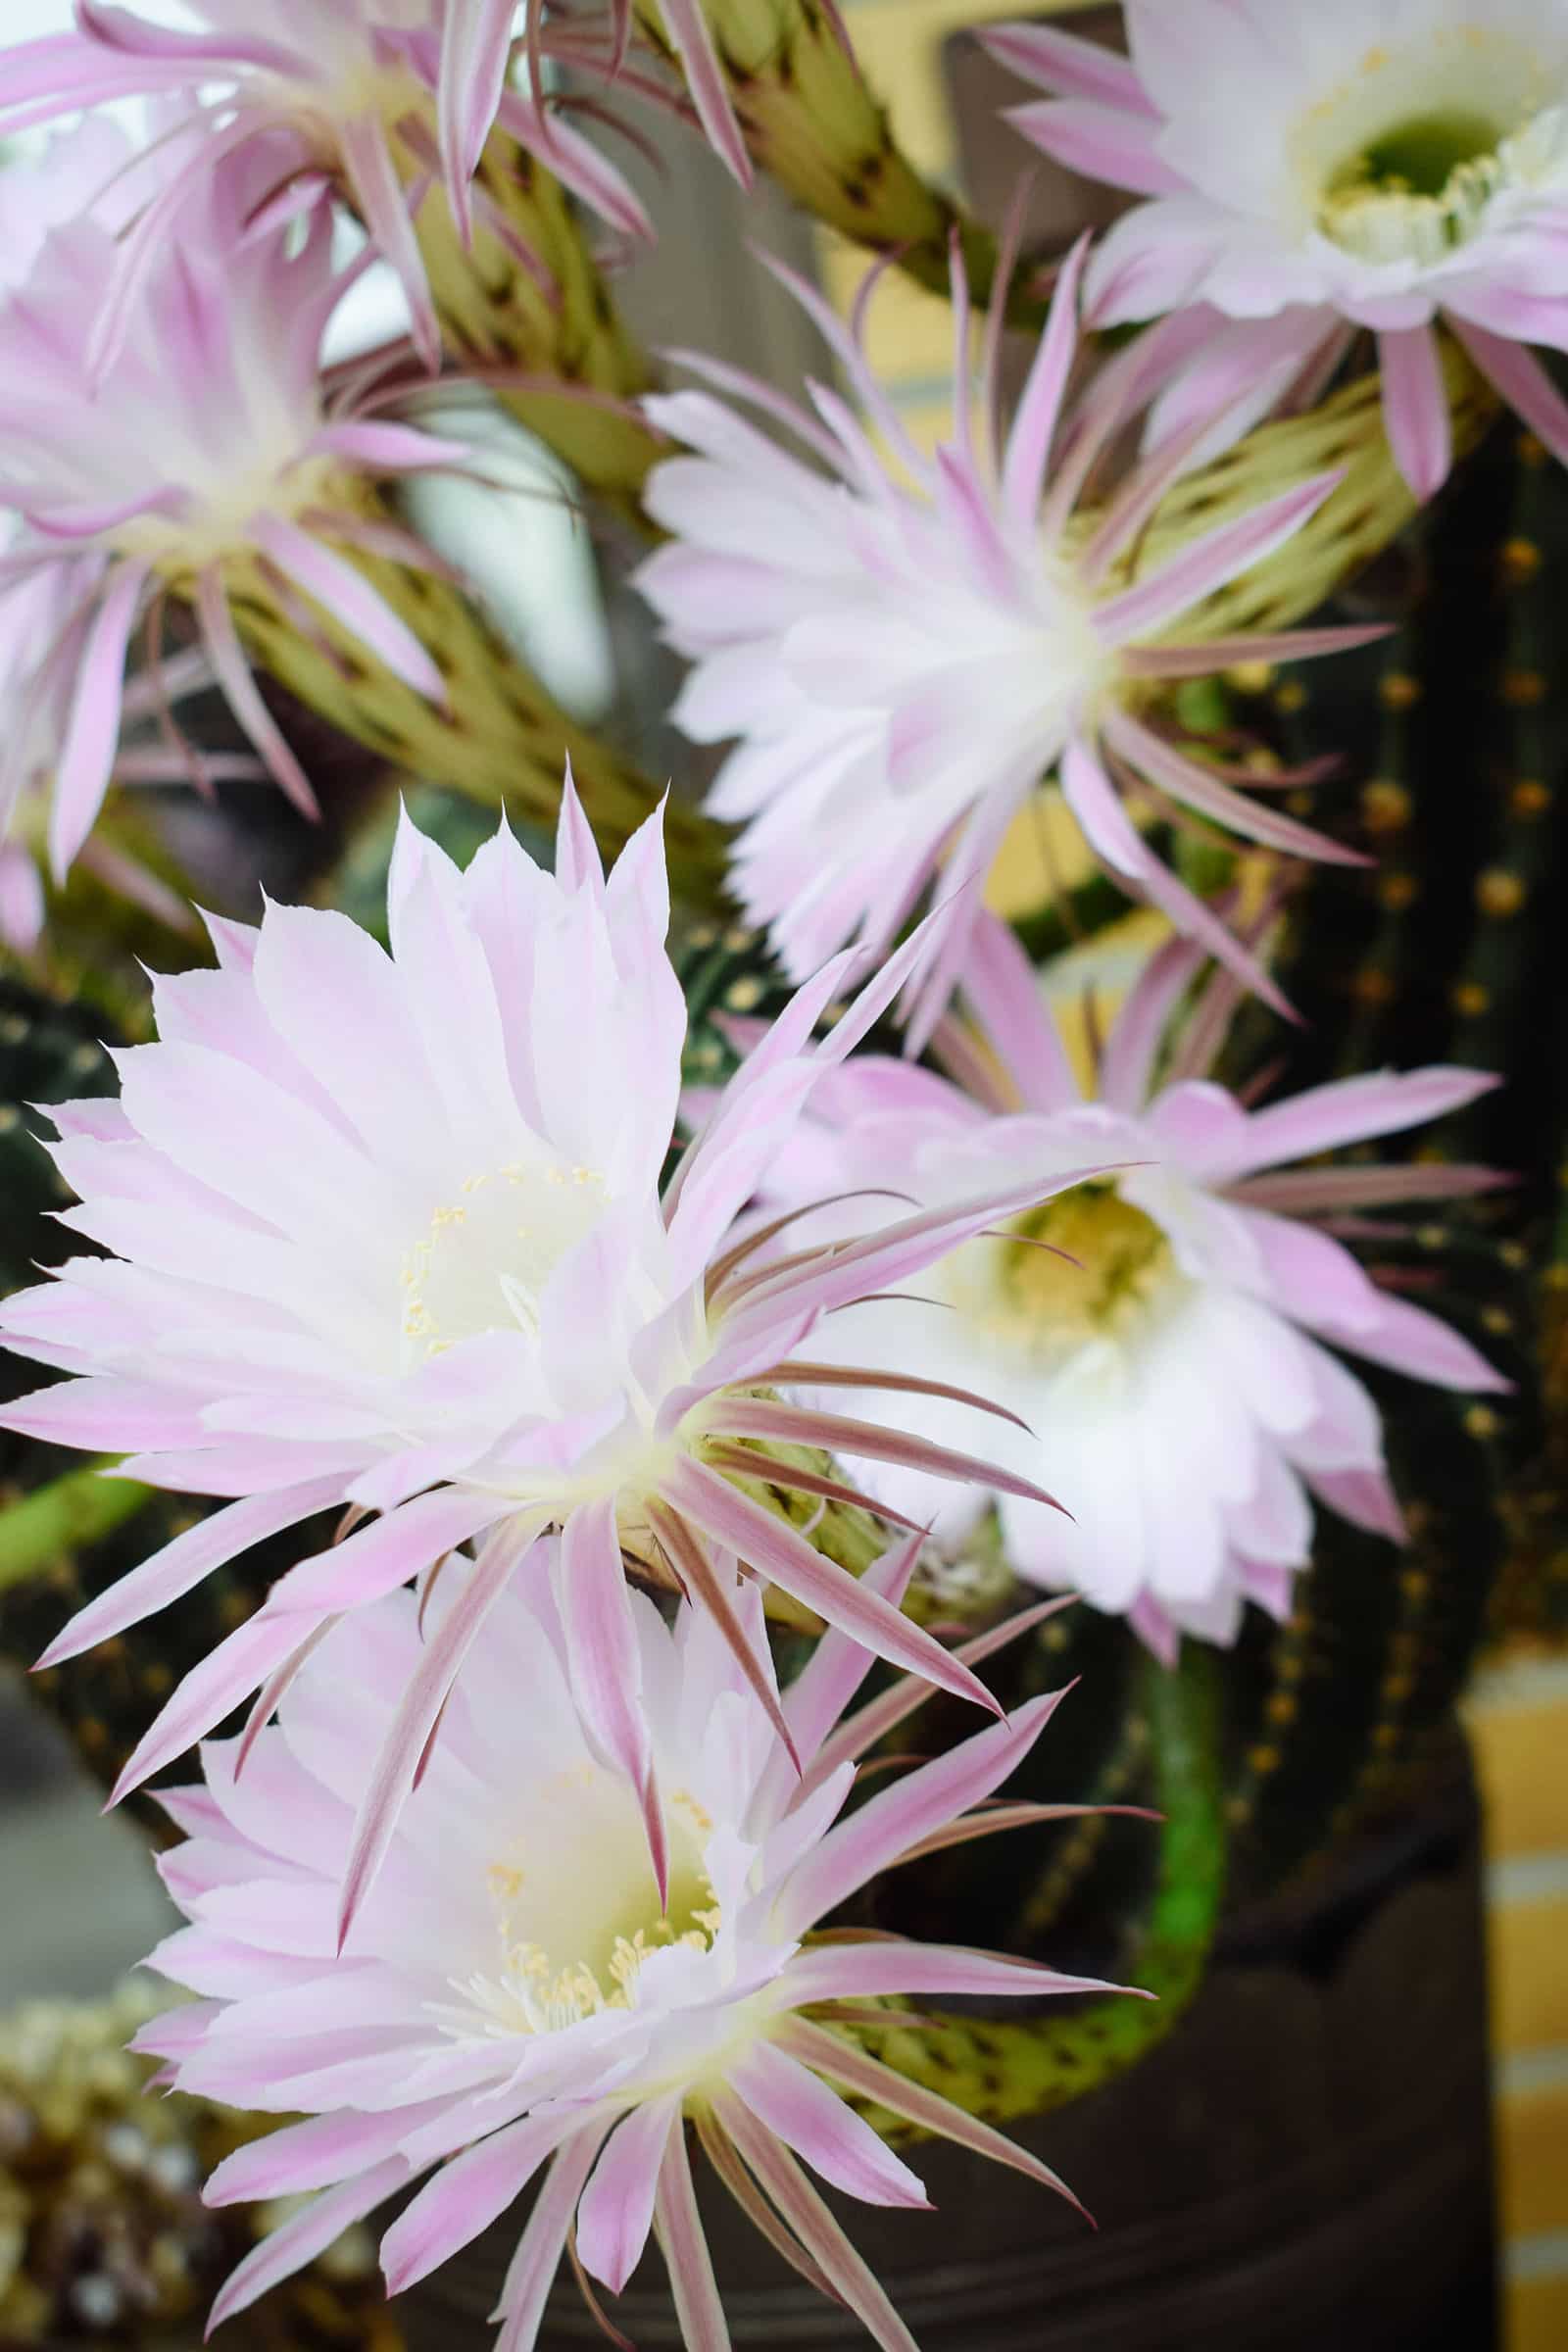 Selenicereus cactus (dragonfruit) with pink and white flowers